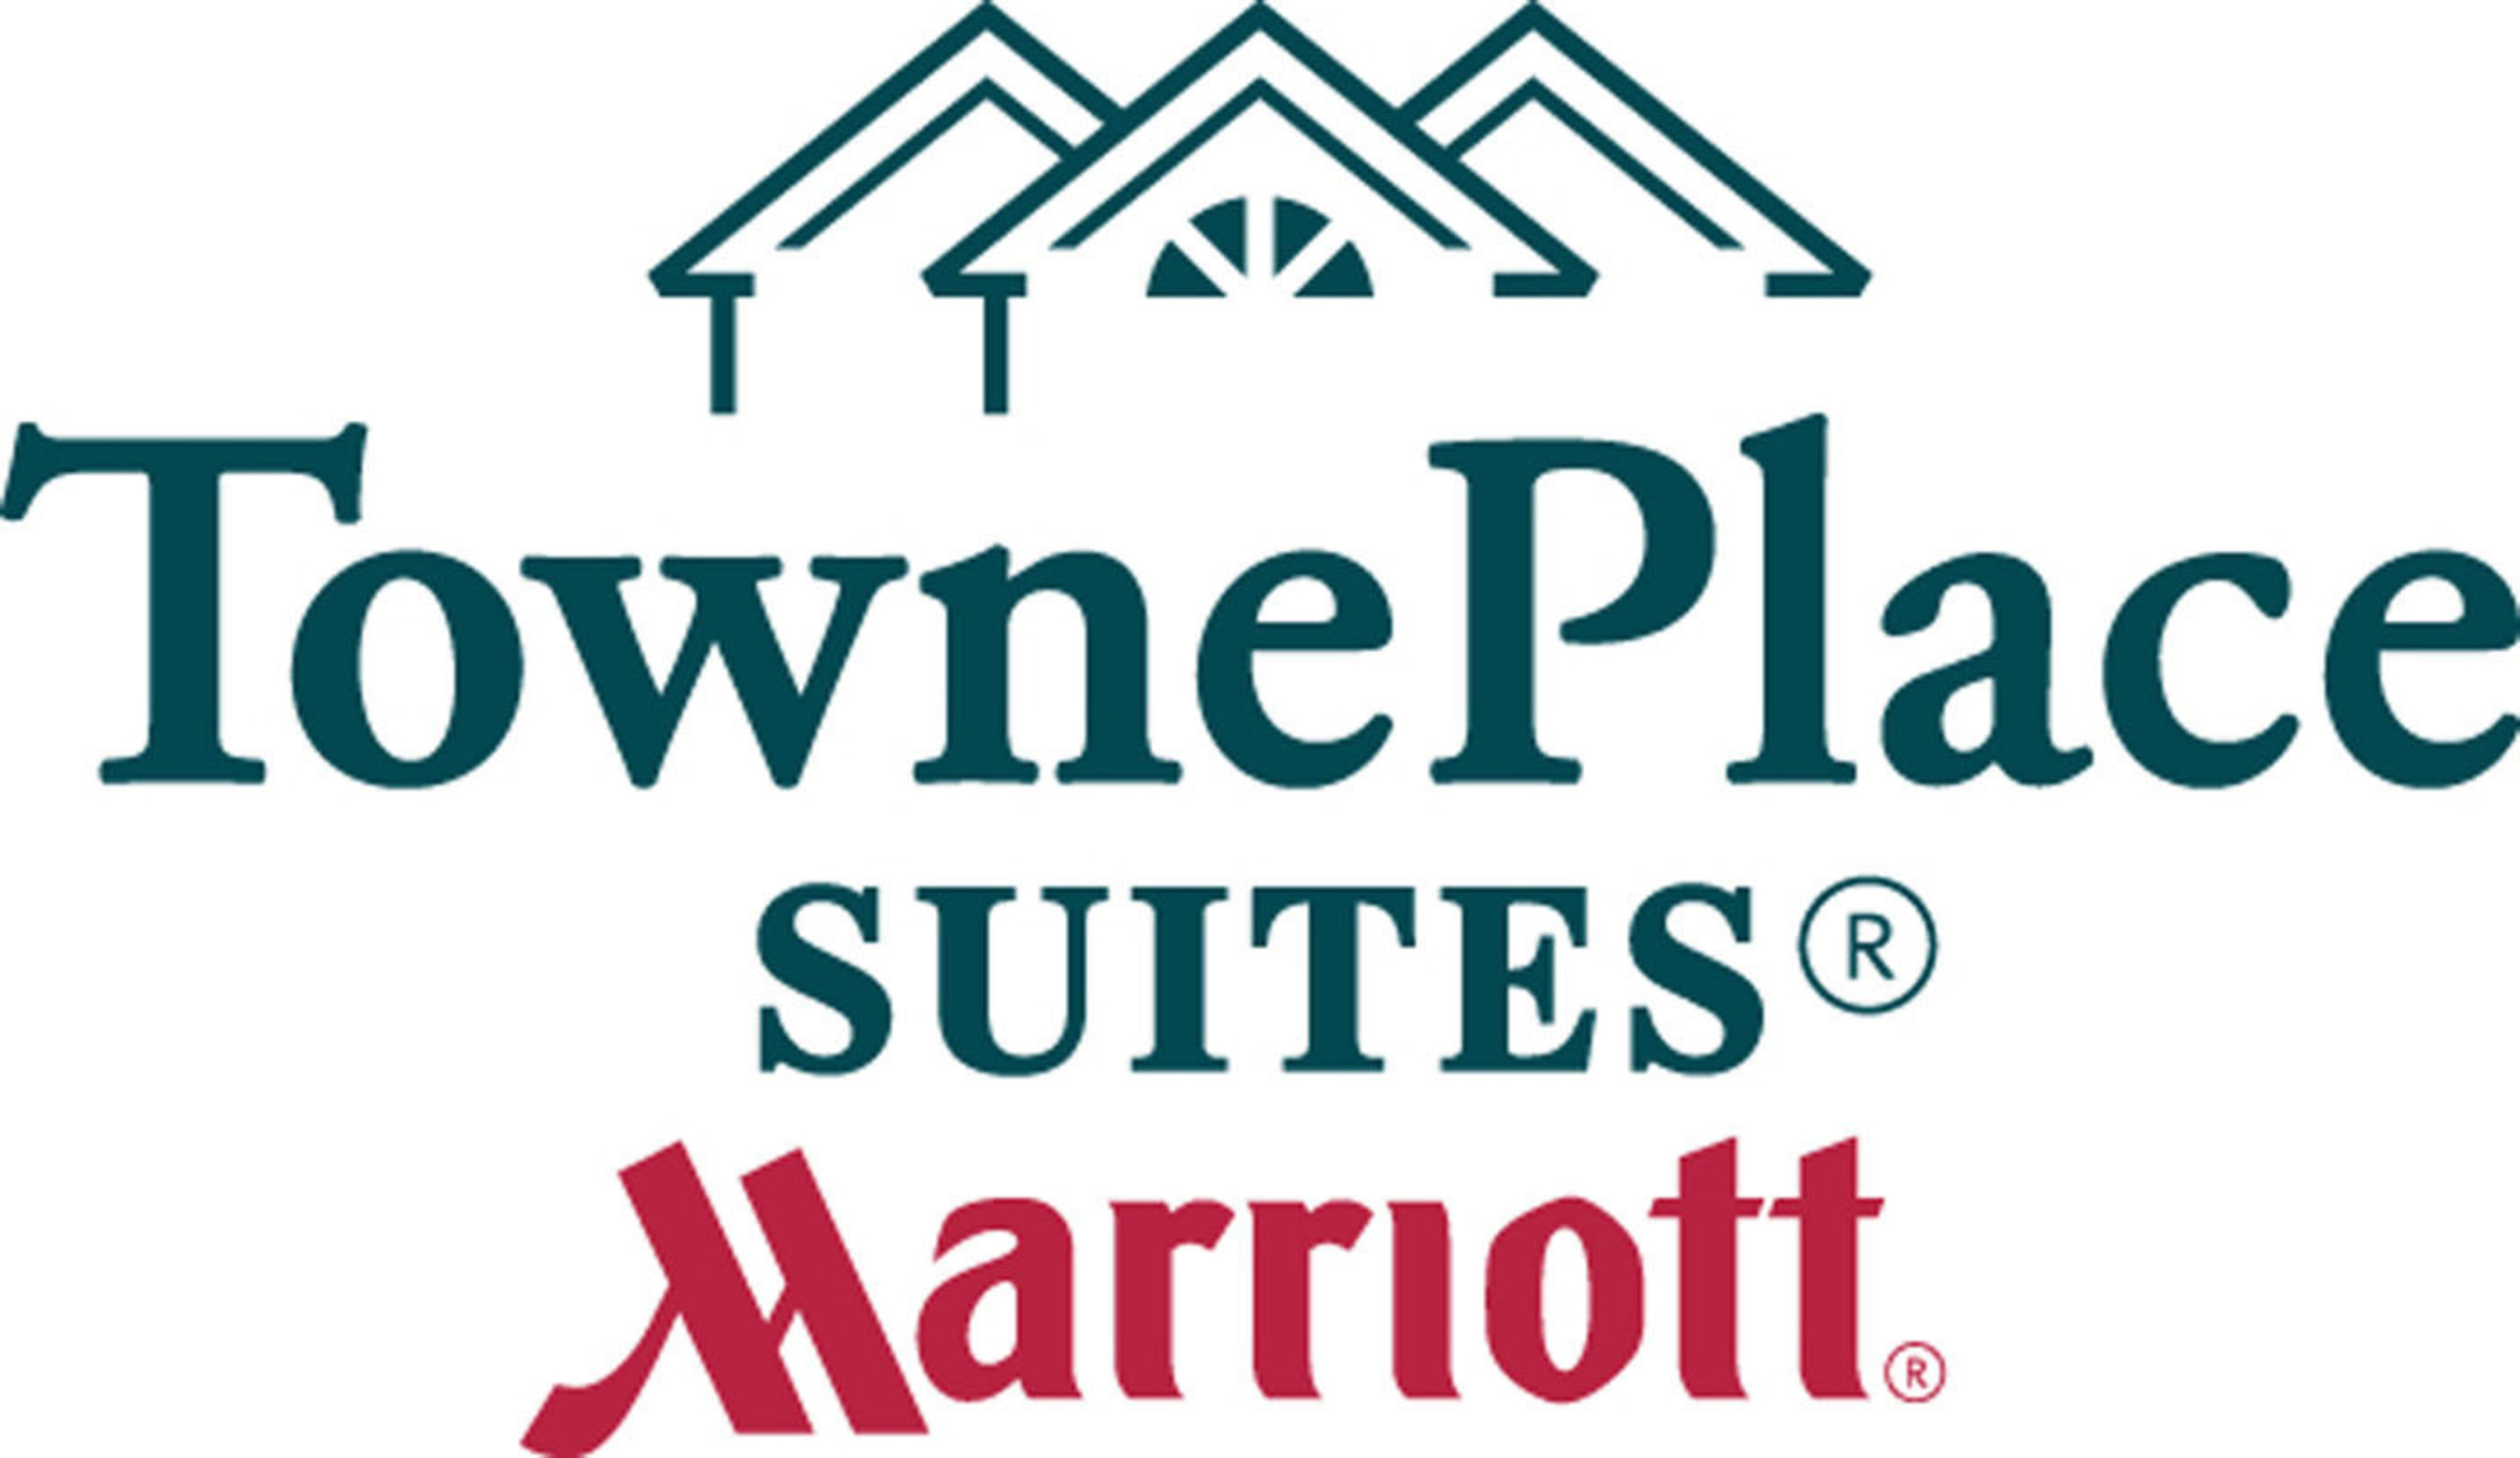 TownePlace Suites by Marriott logo